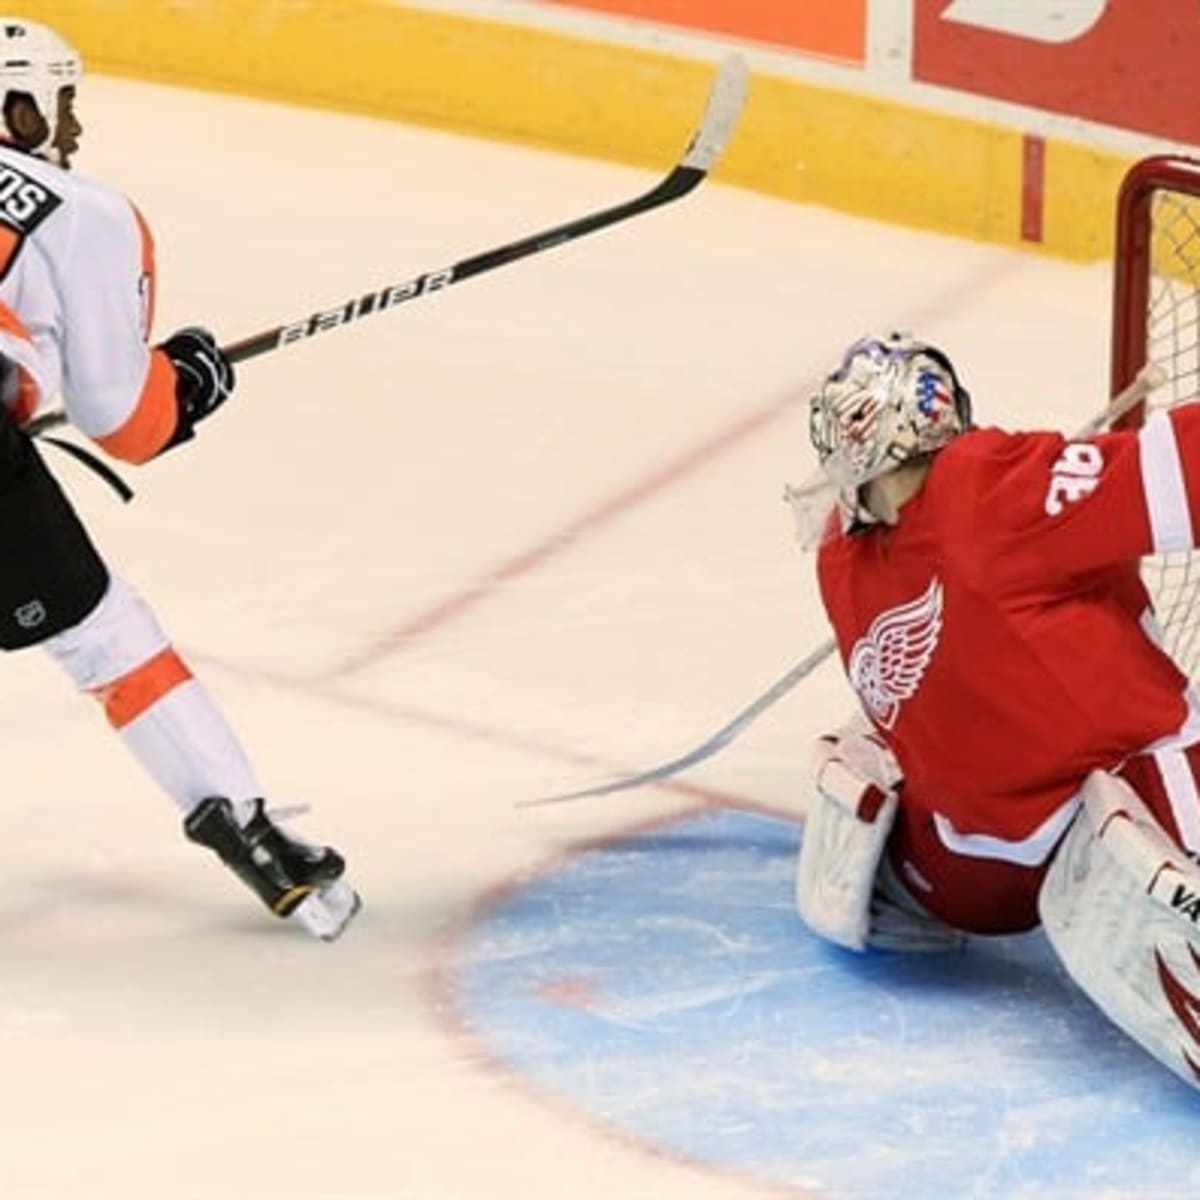 How Wayne Simmonds is paying it forward at home